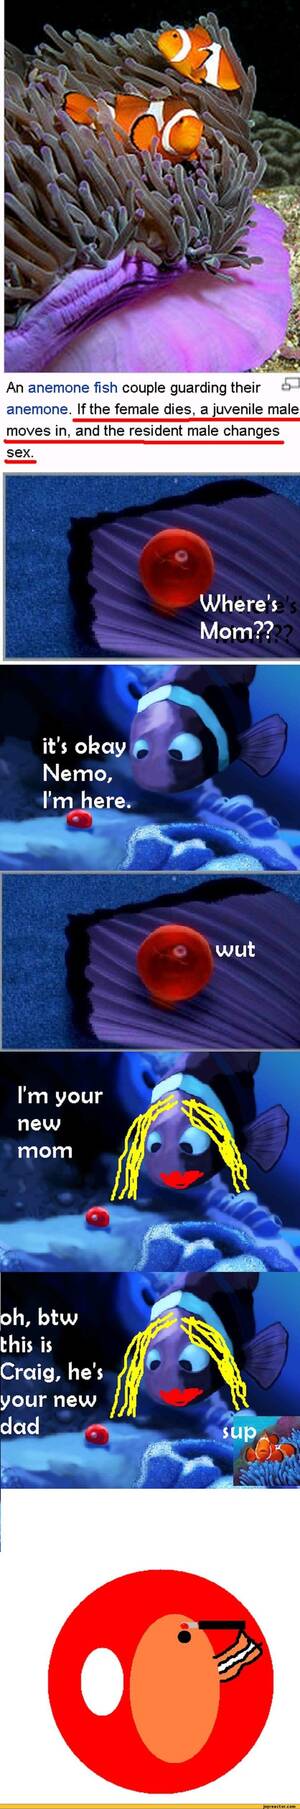 Finding Nemo Cartoon Porn - fucking-nemo / new / funny posts, pictures and gifs on JoyReactor